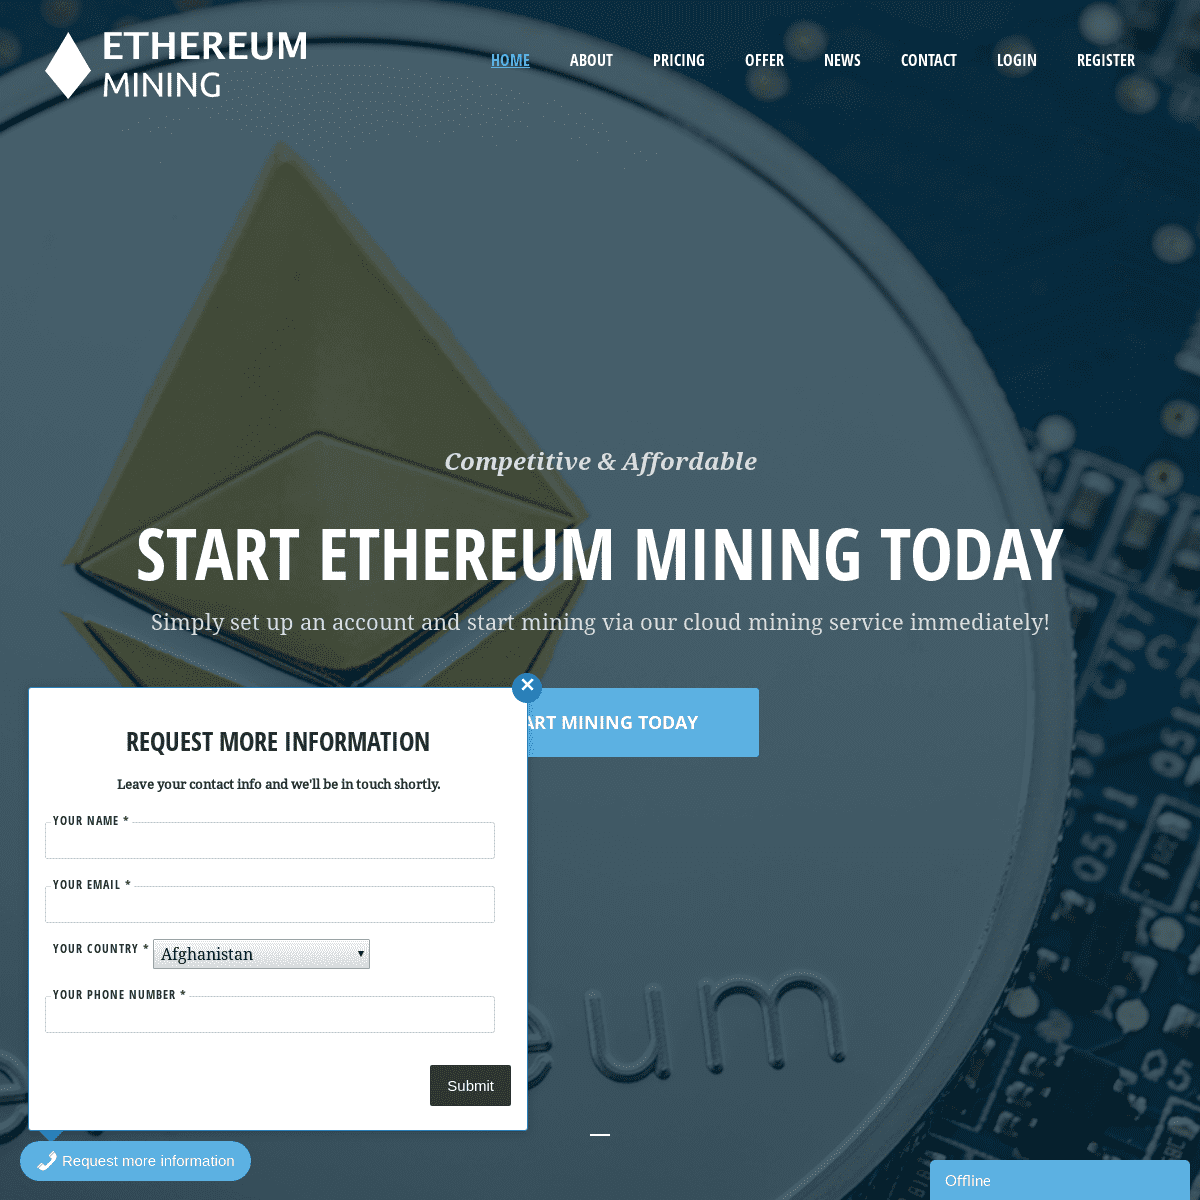 Ethereum Mining | The Most Competitive Cloud Mining Service